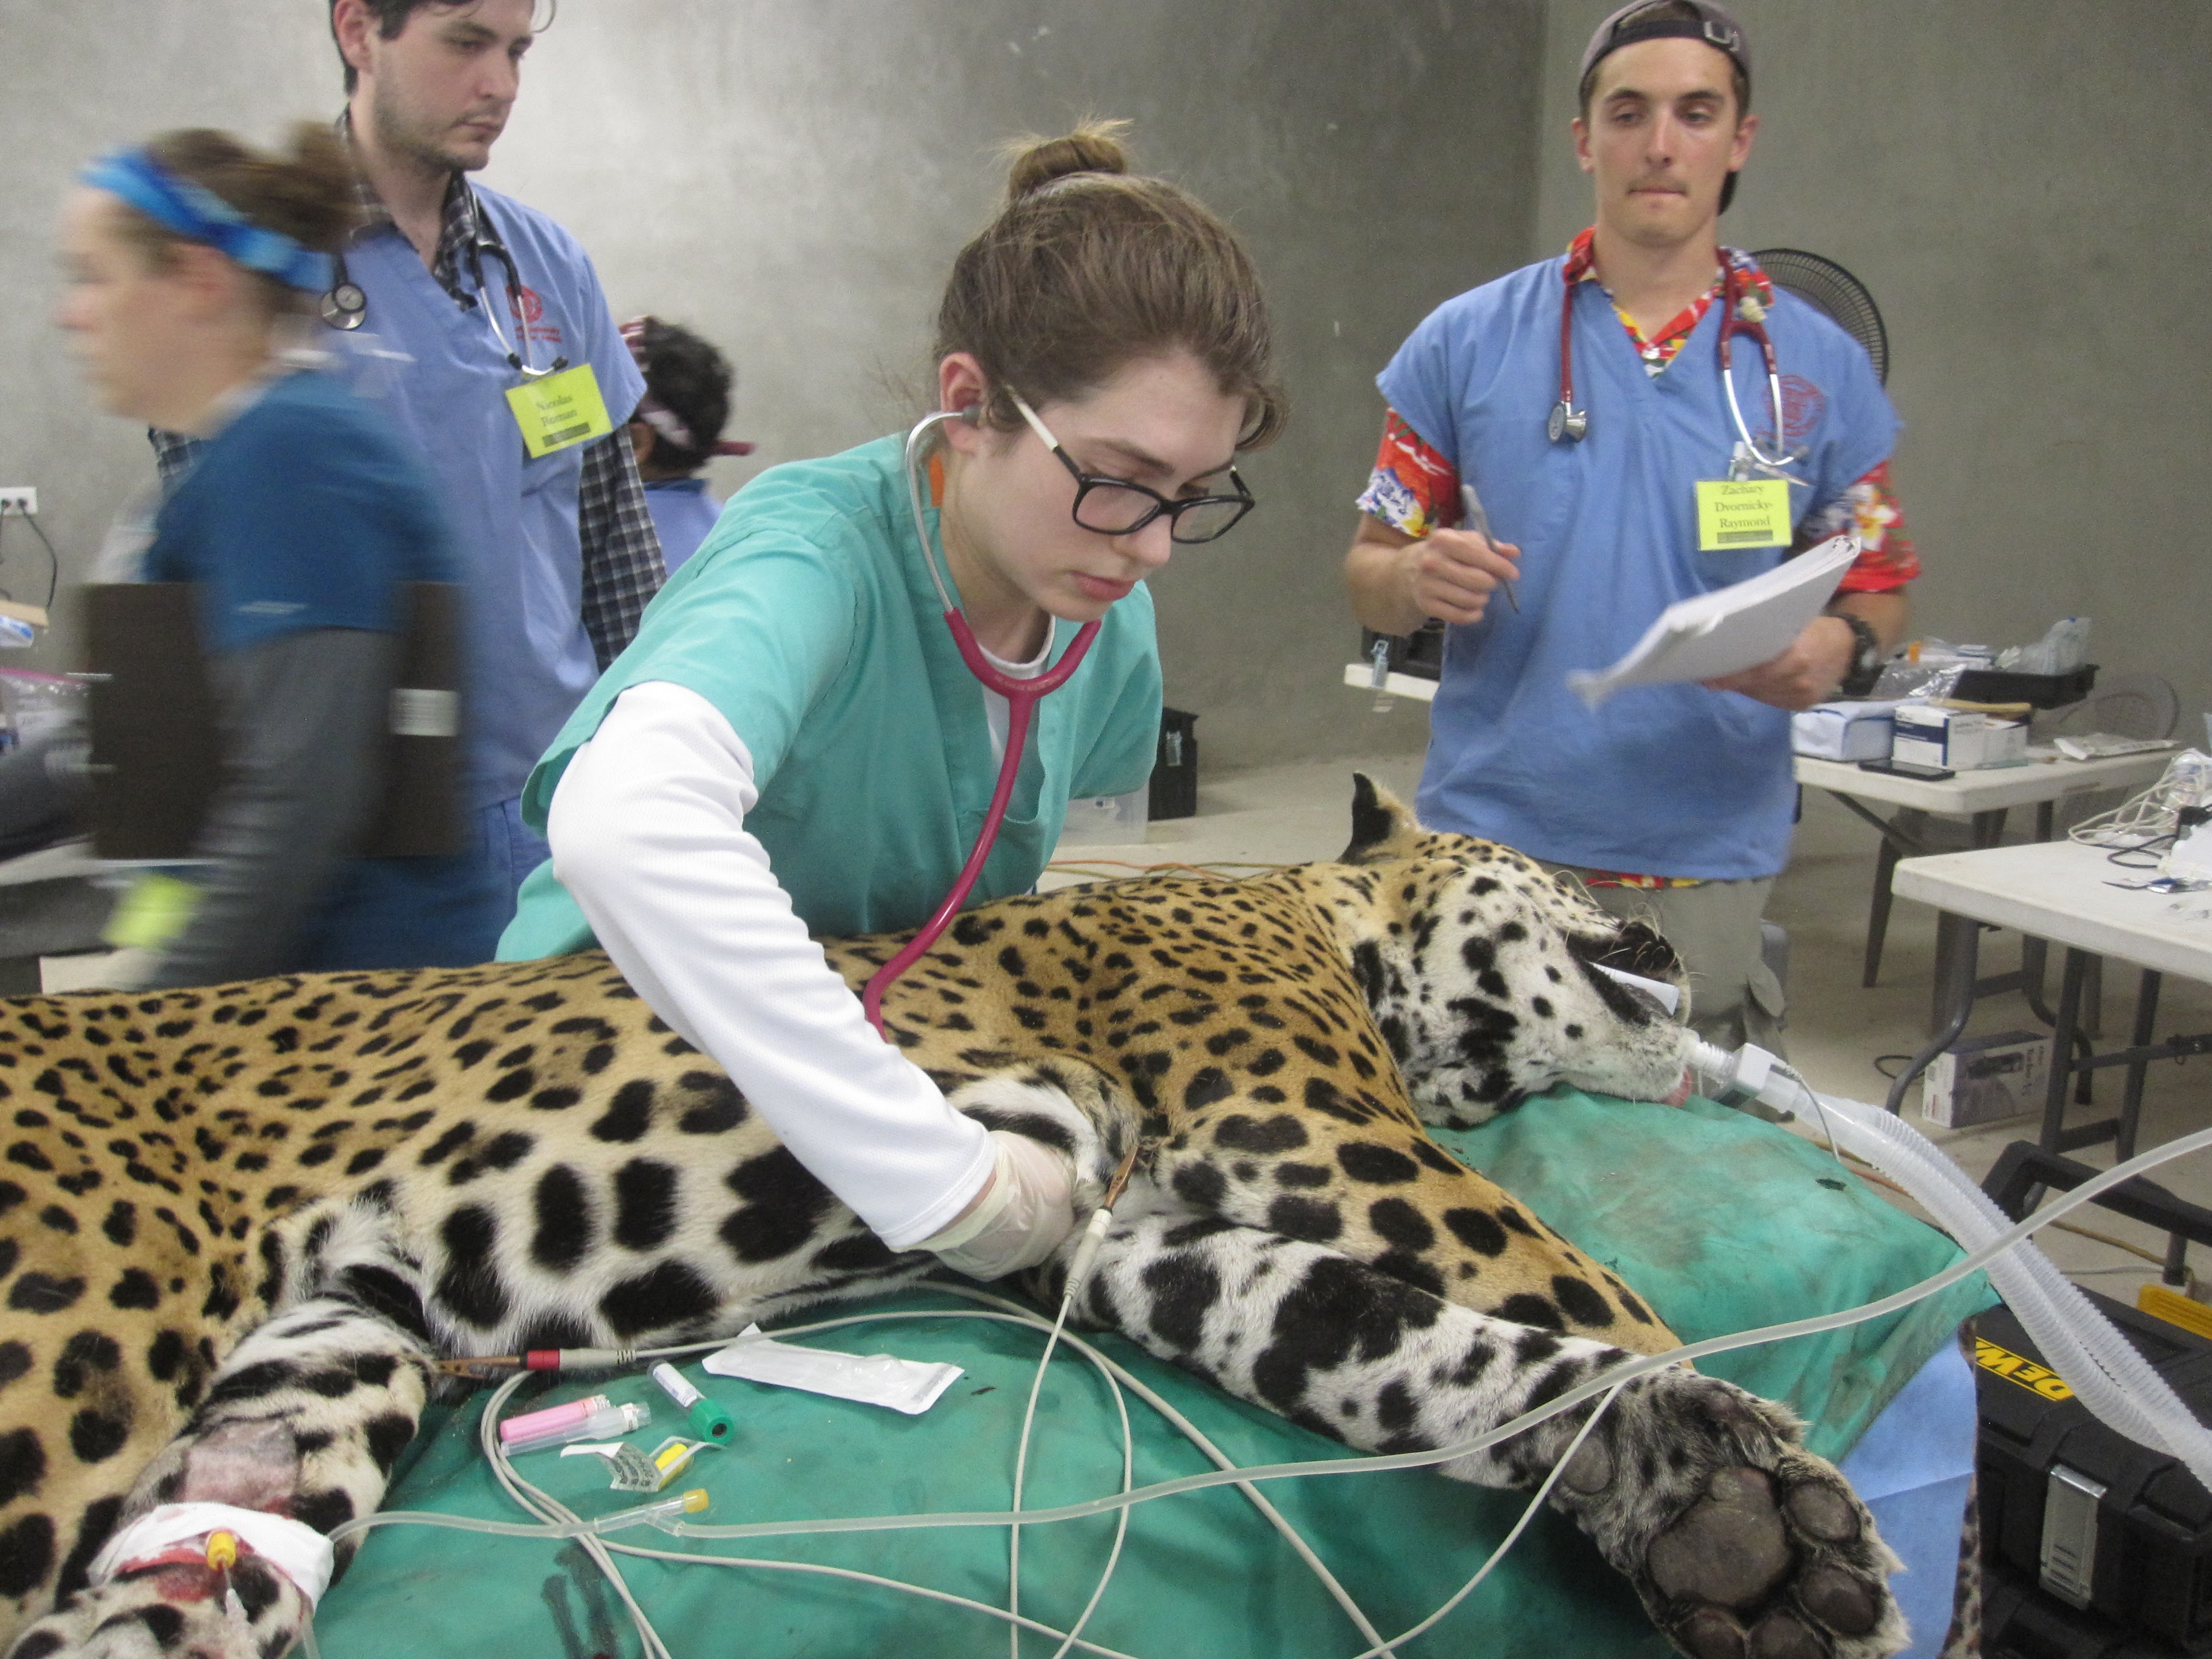 Anesthetized jaguar lies on an exam table with IVs and intubation while a vet student listens to its heartbeat with a stethoscope.